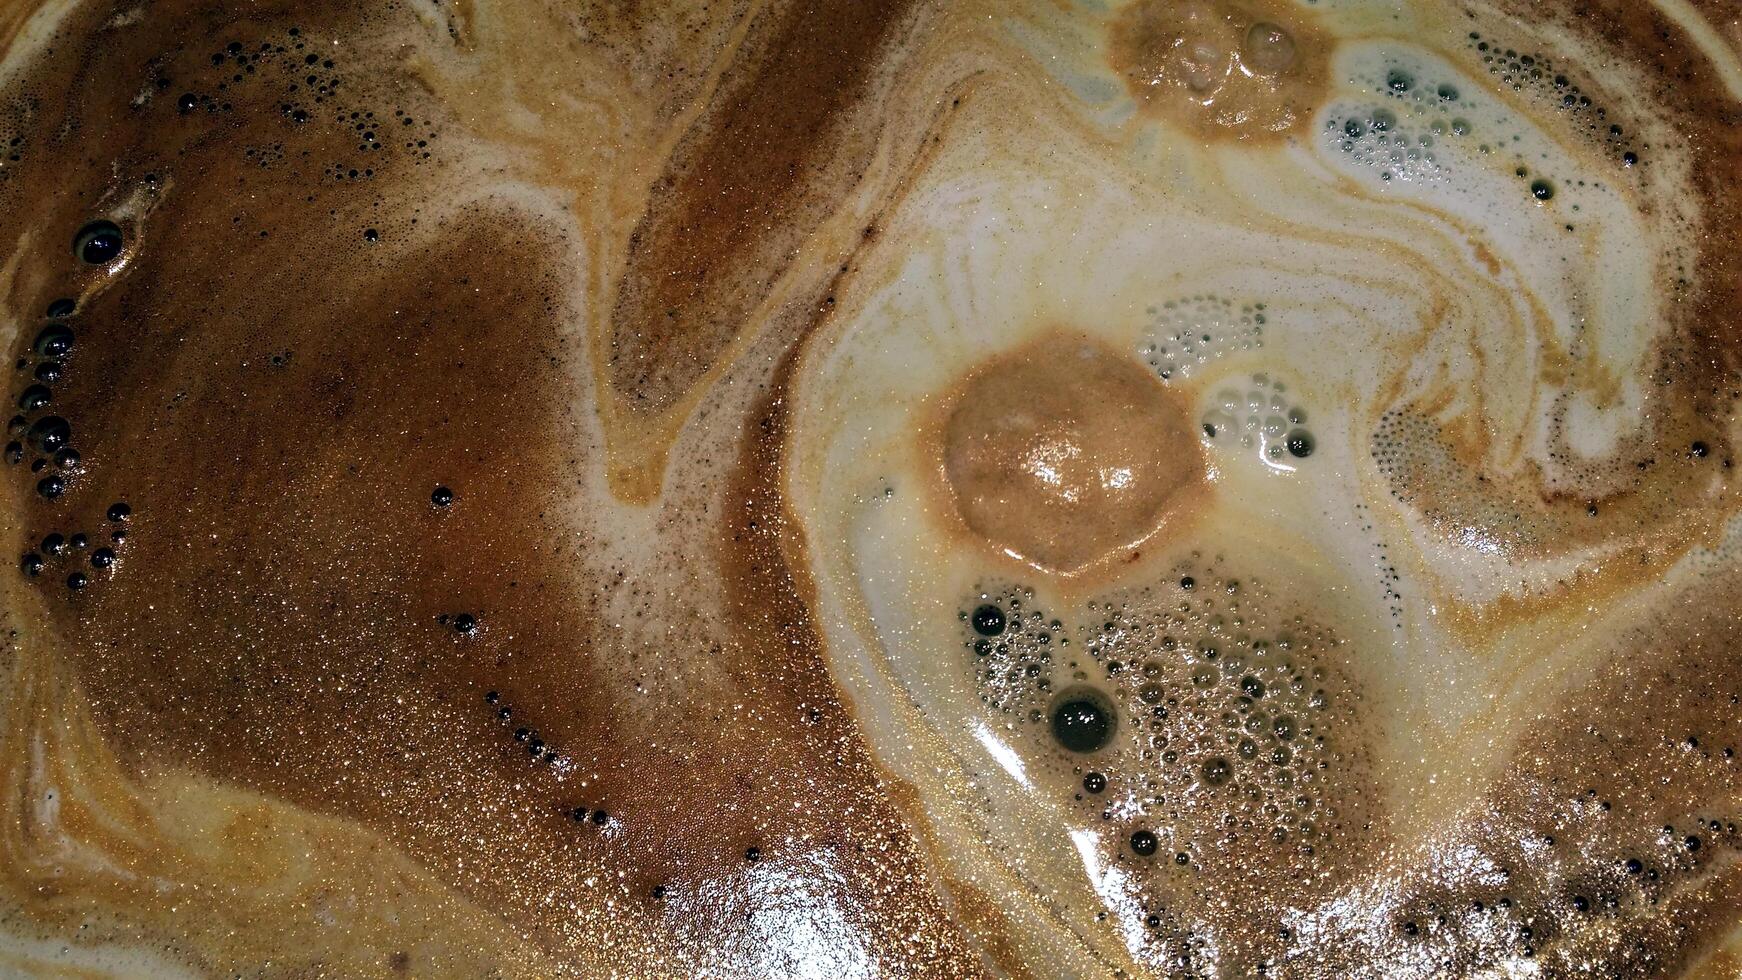 experiment photo with cappuccino foam and milk and coffee